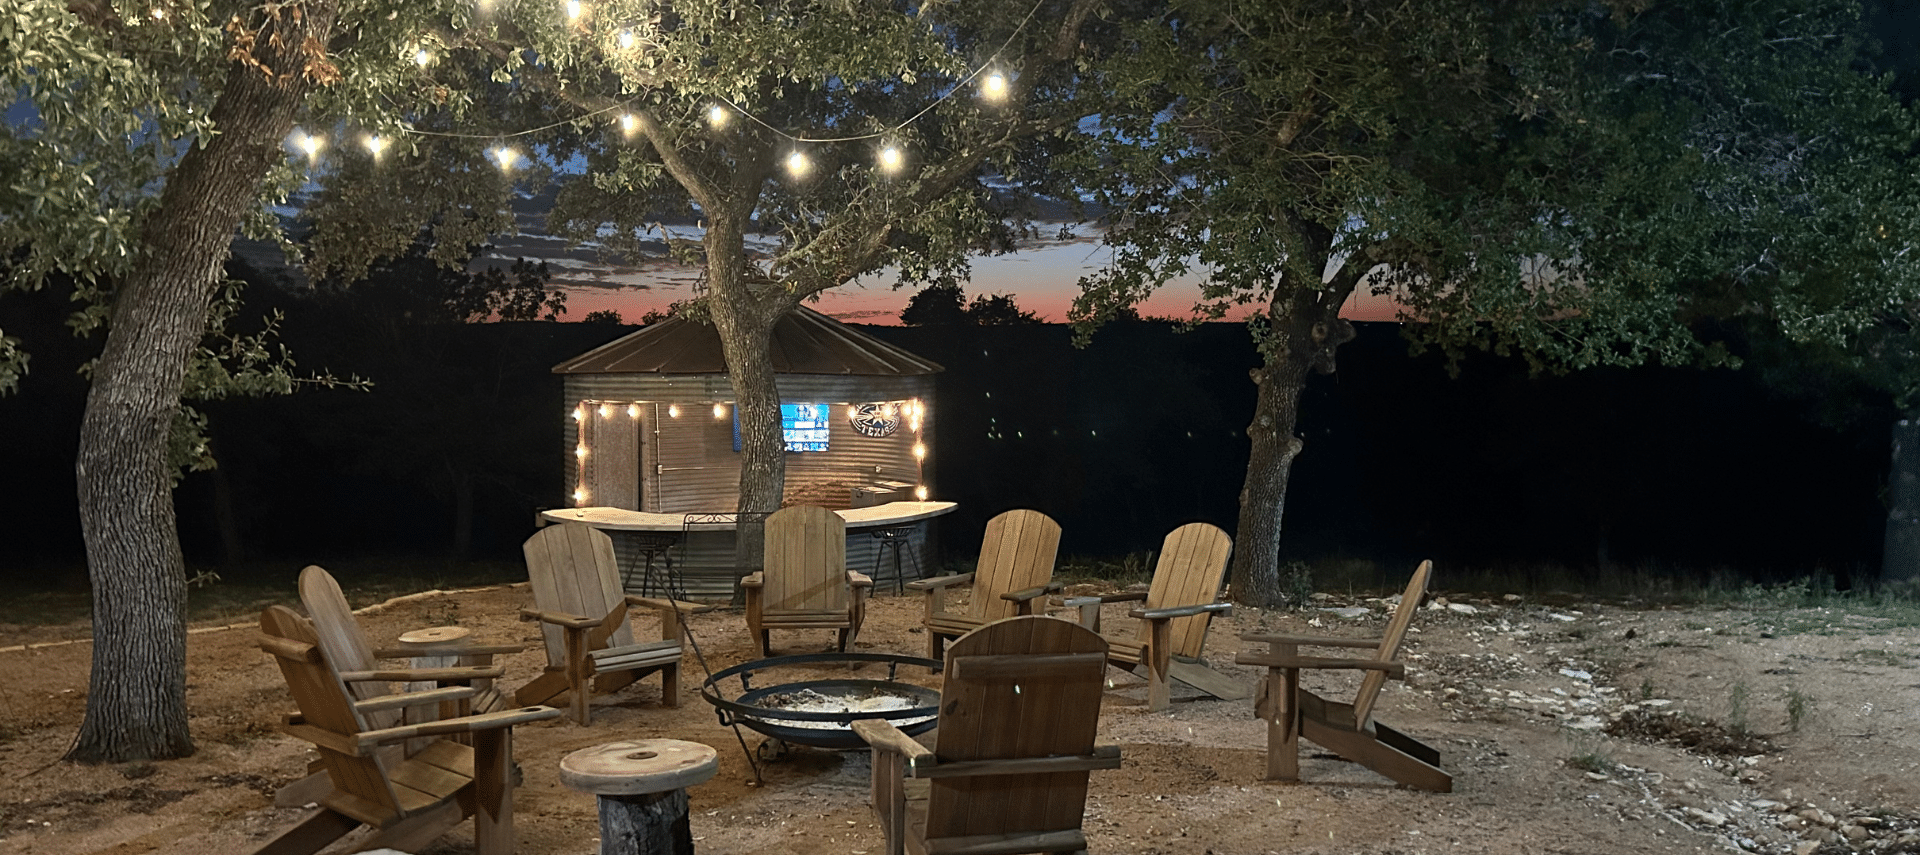 Image of Outdoor Firepit and string lights at night at Inn at Sunset Mill Ranch in Wimberley Texas